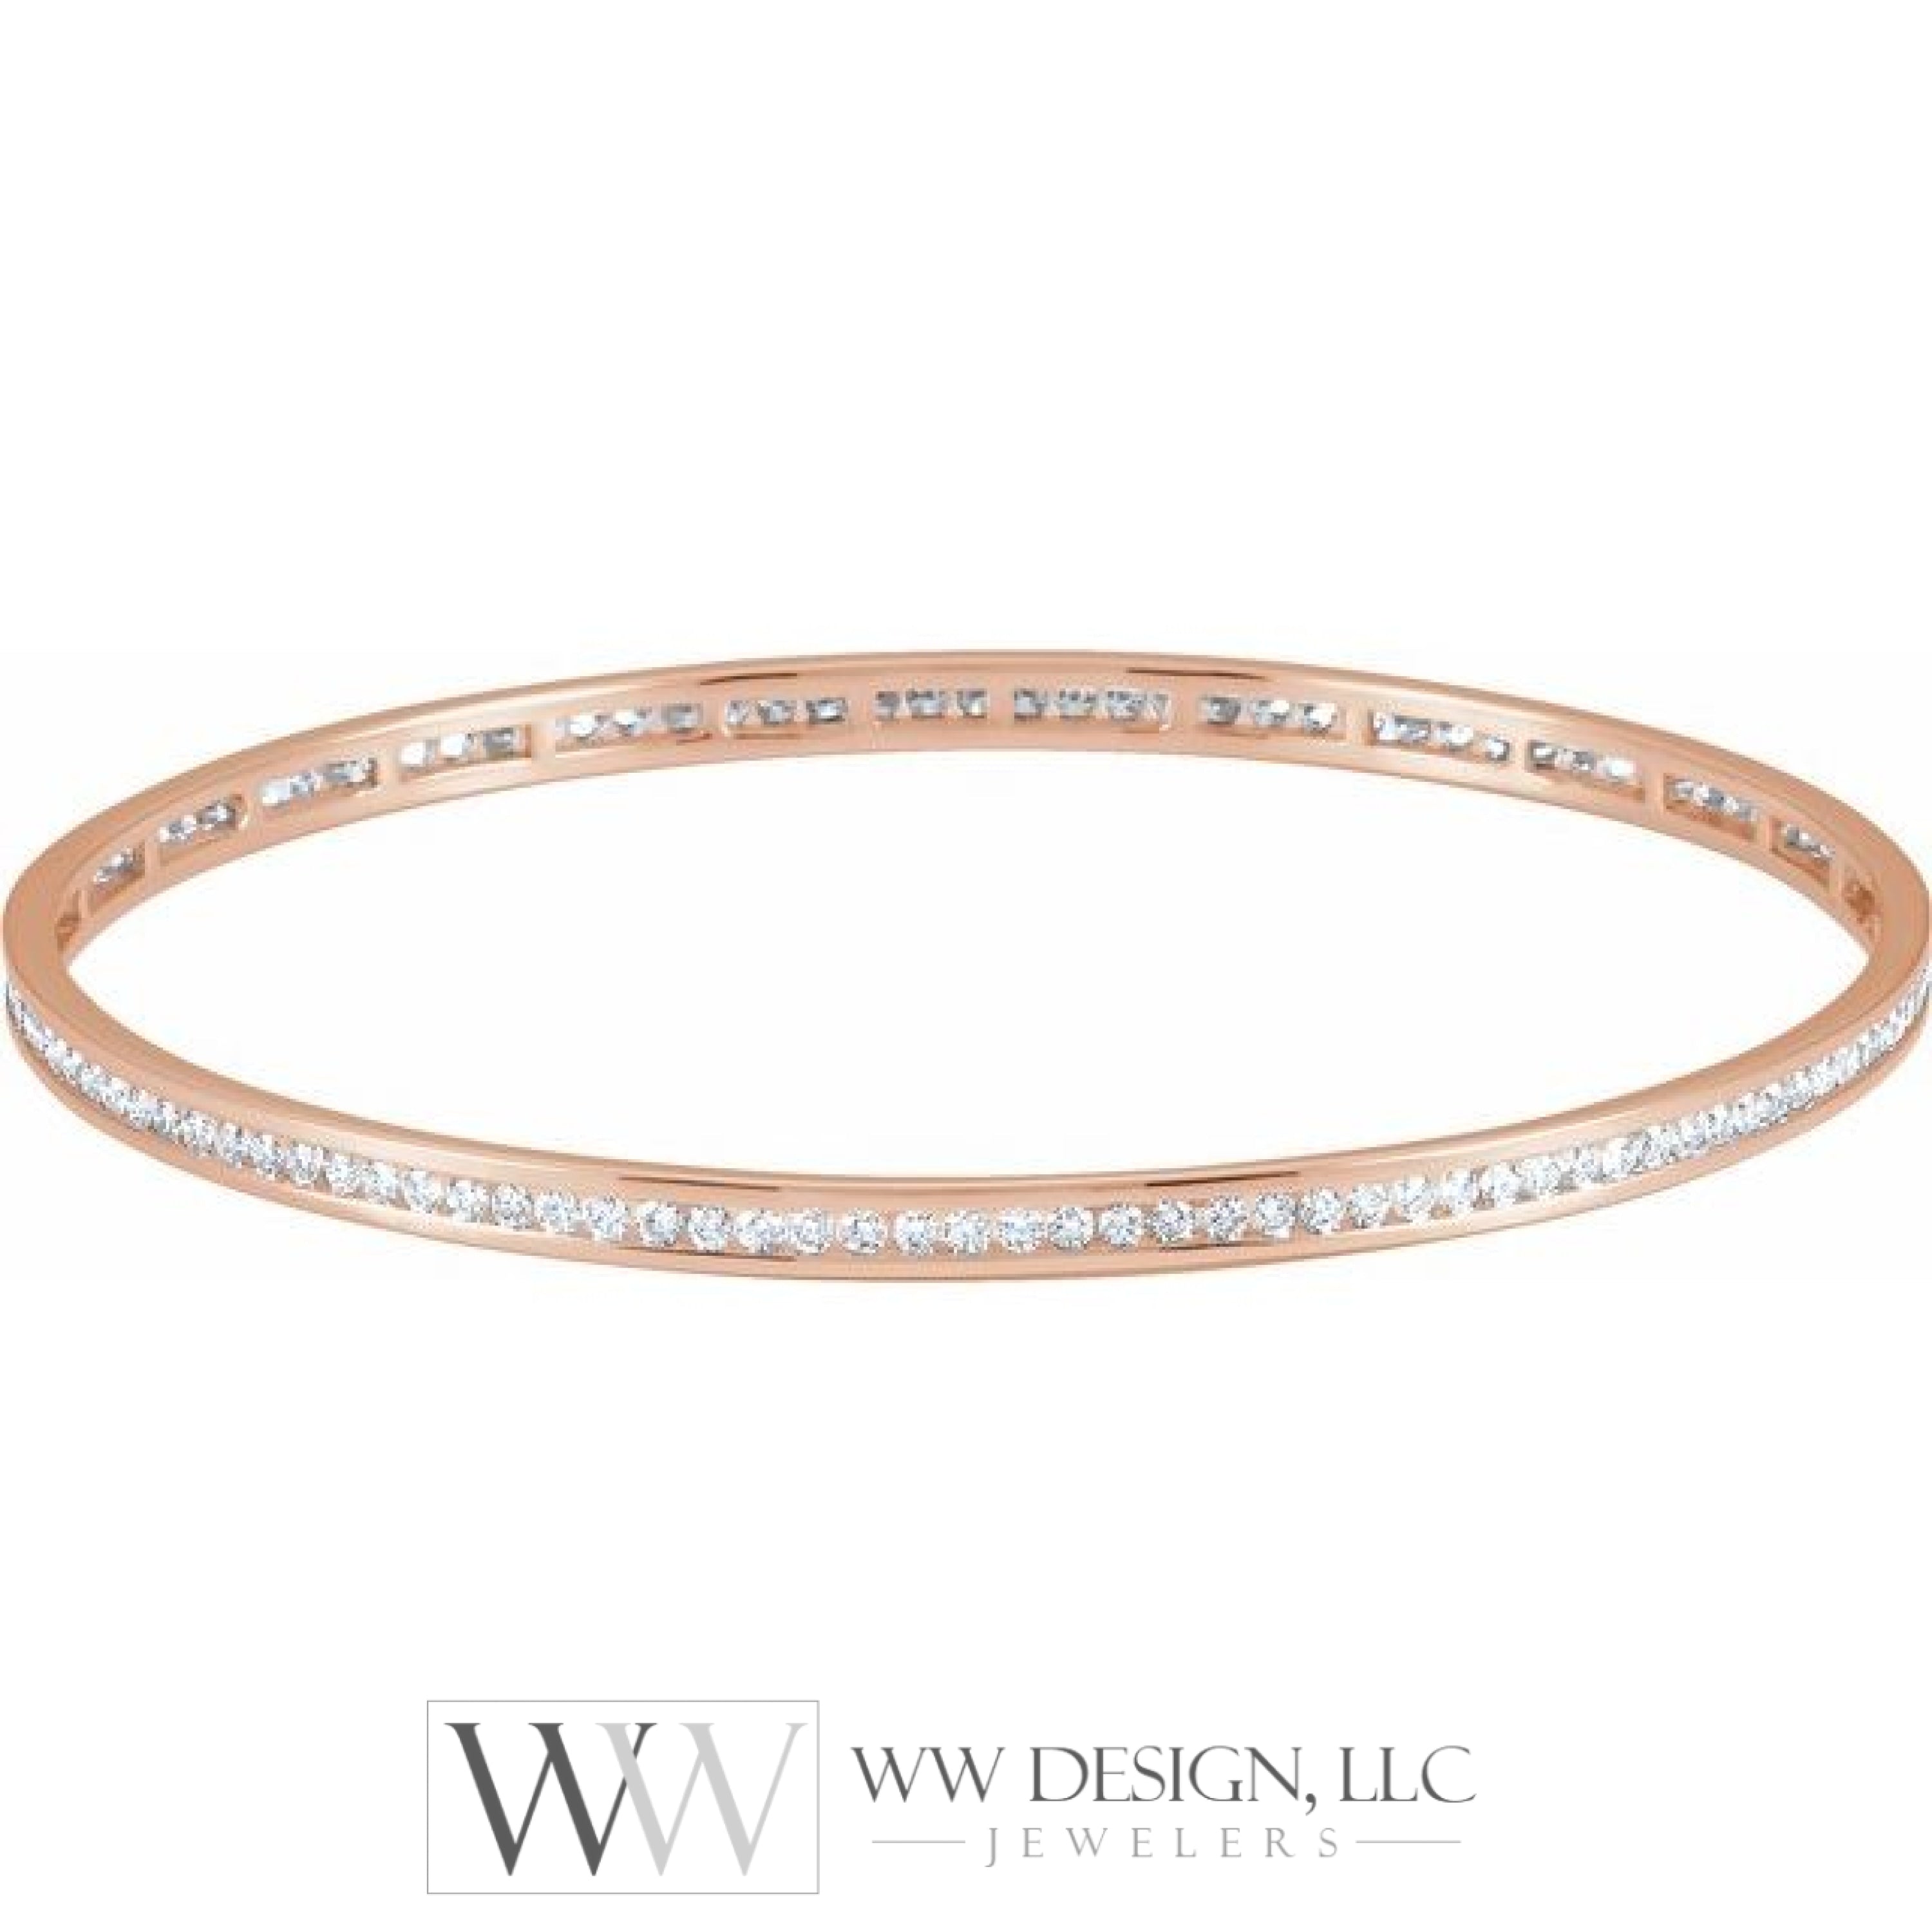 2.25 CTW or 1.5 CTW Natural Diamond Stackable Bangle 8" Bracelet - 14k Gold (Yellow, White or Rose) wwdesignjewelers.com